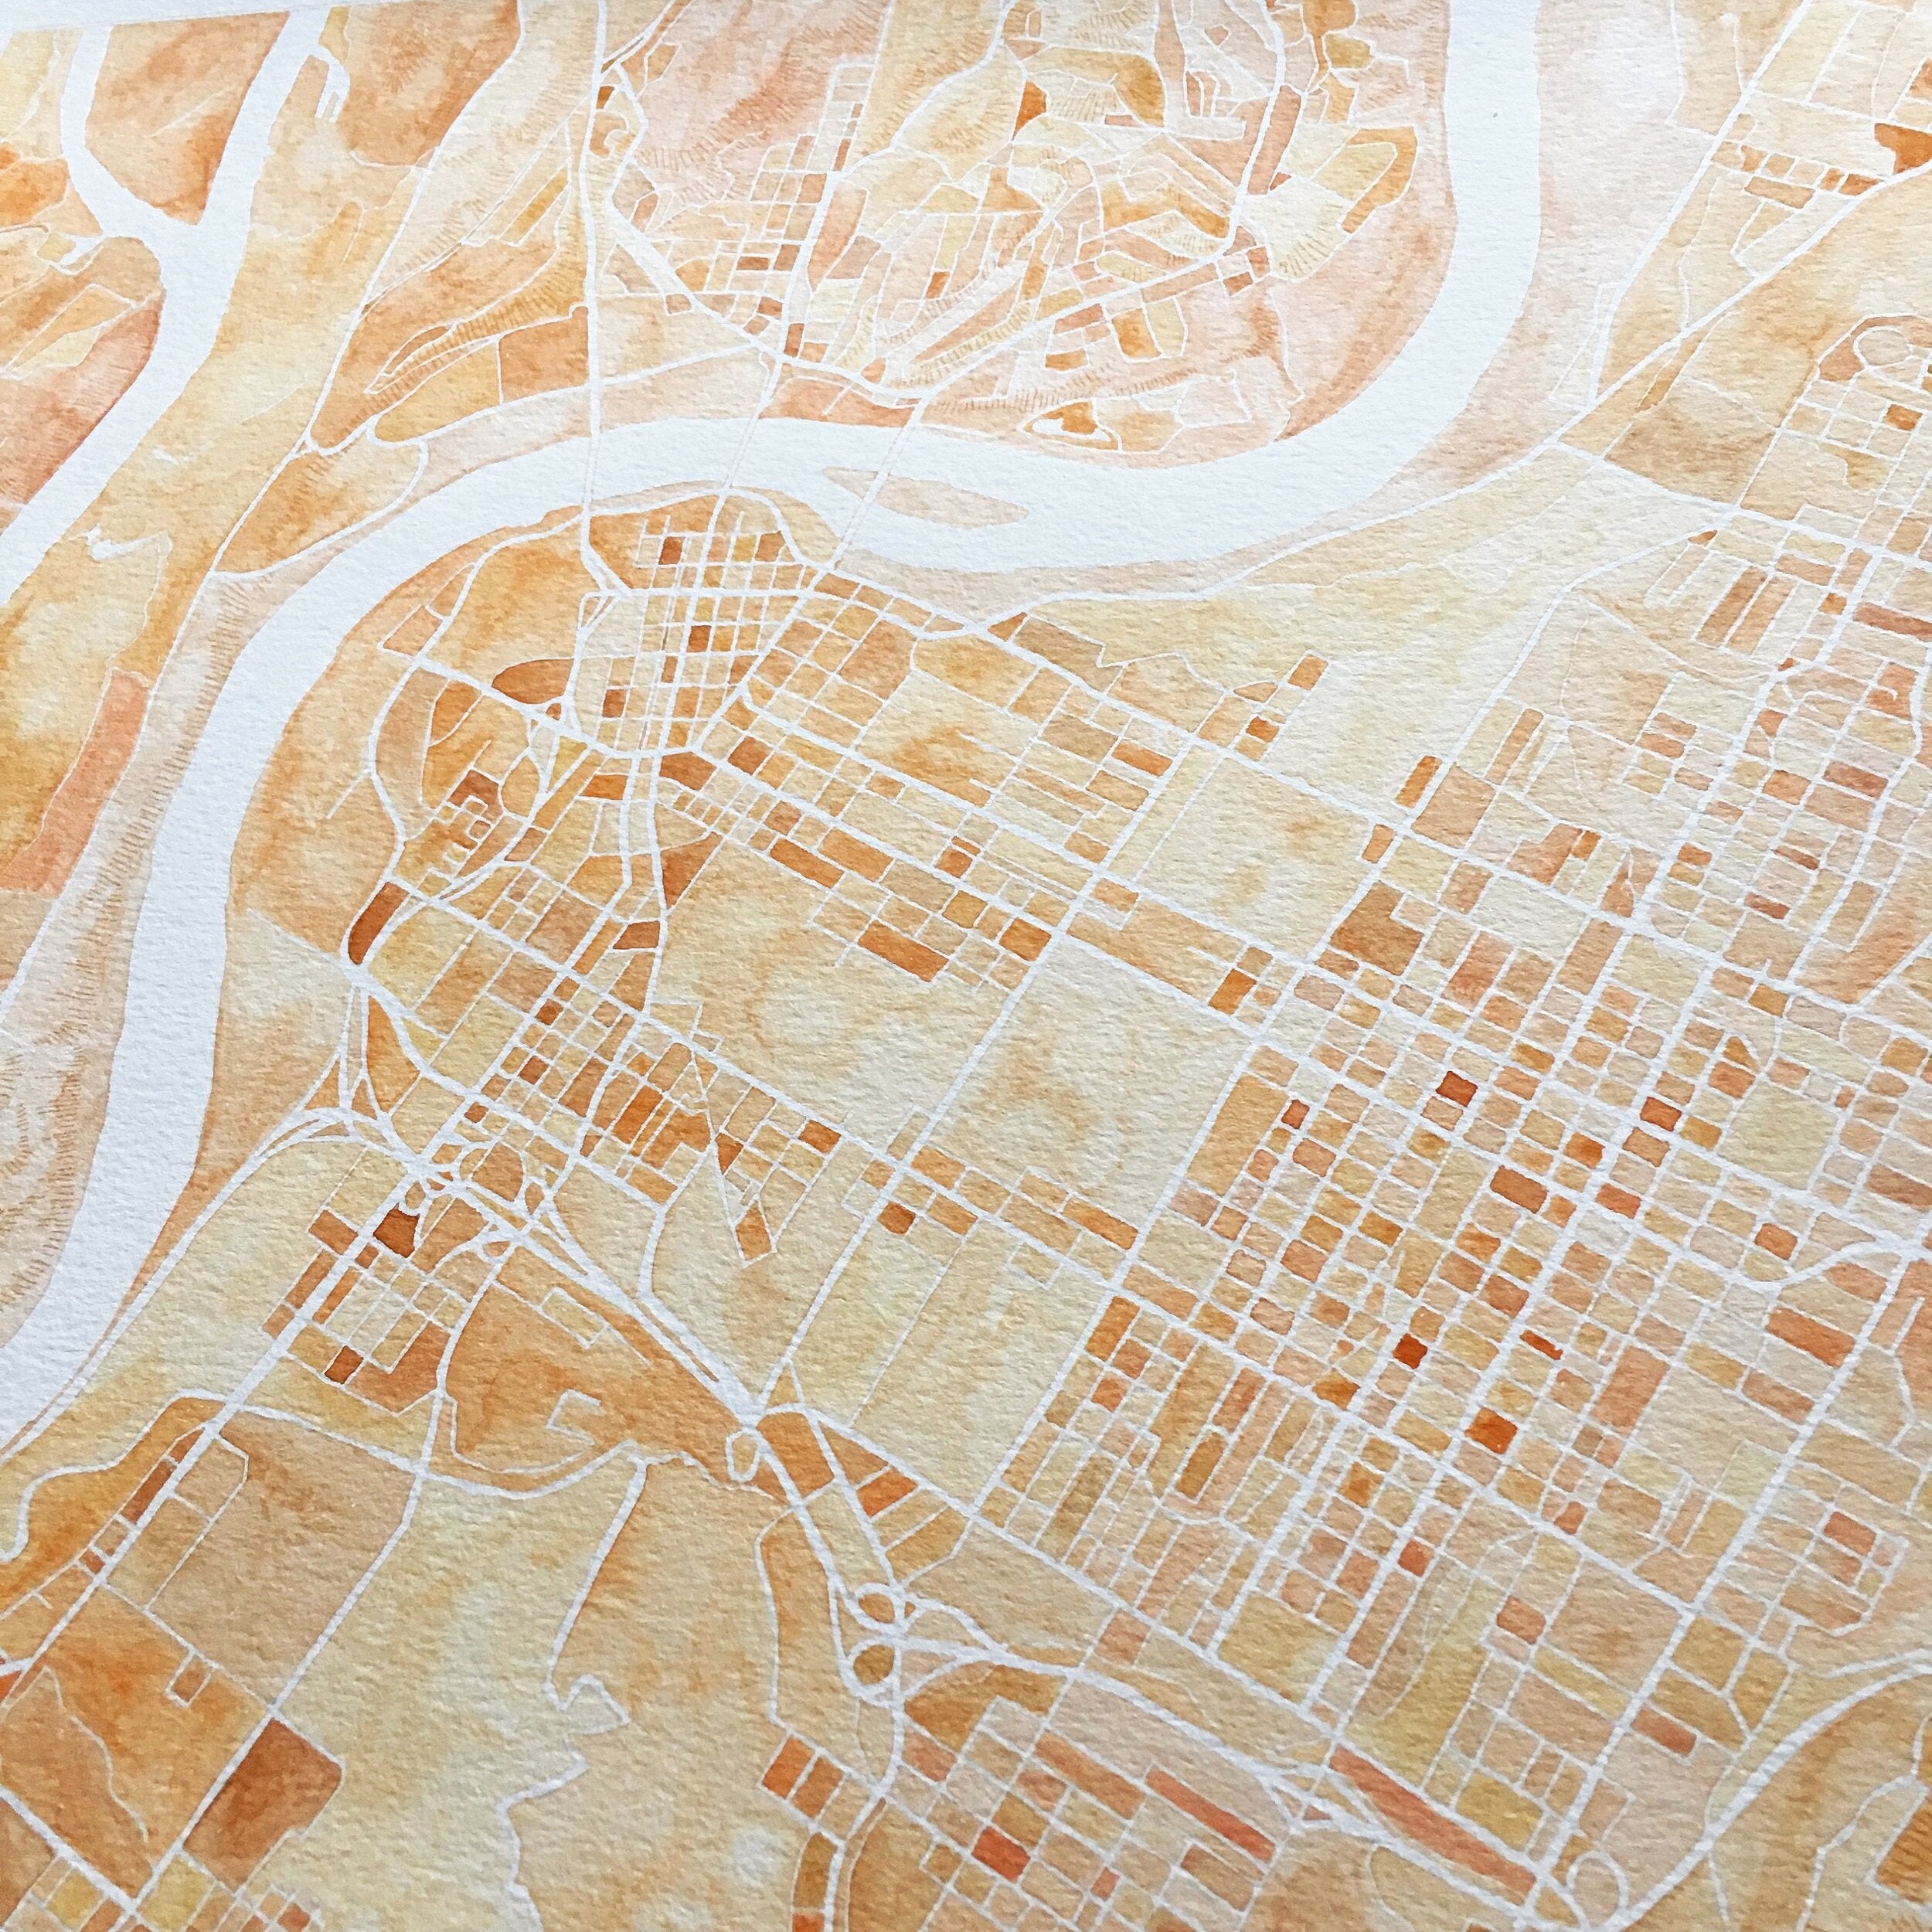 CHATTANOOGA Watercolor City Blocks Map: ORIGINAL PAINTING (Commission)